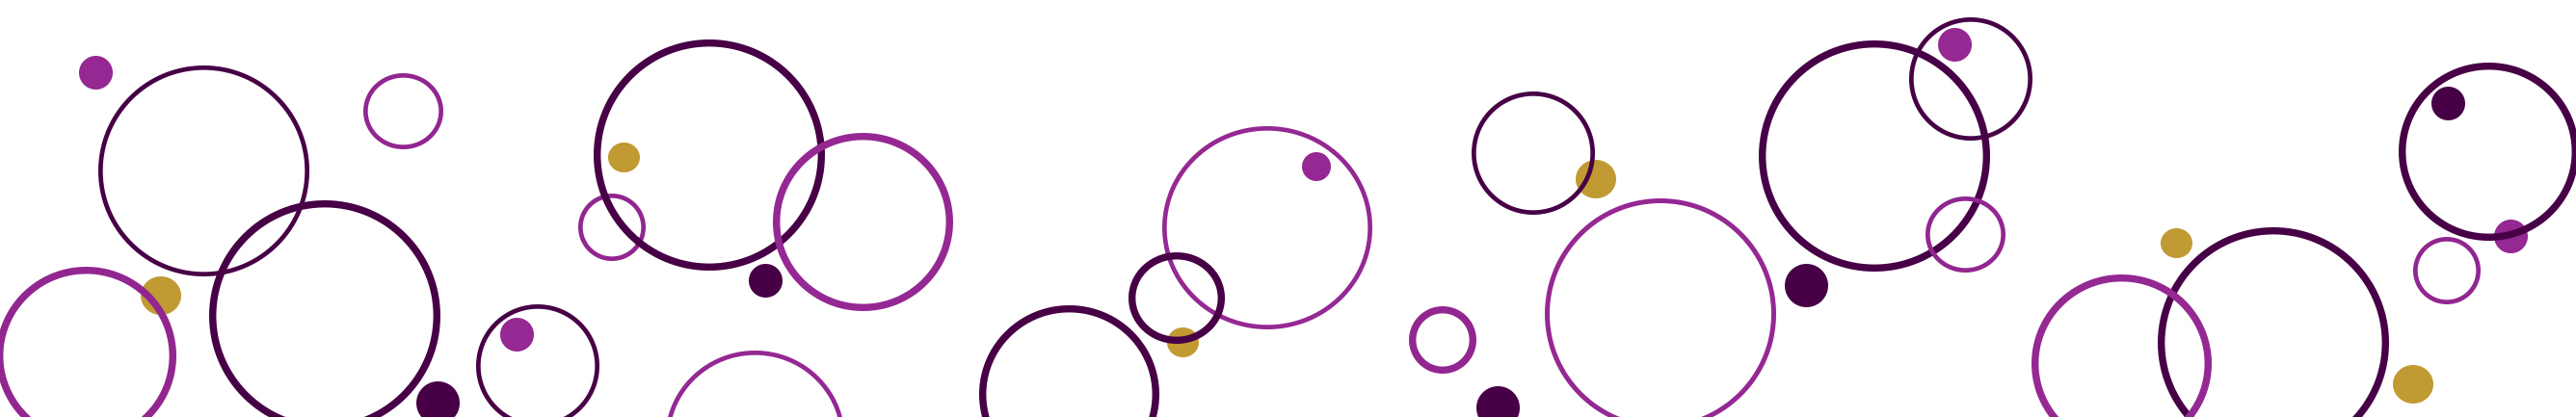 Purple and violet overlapping circles